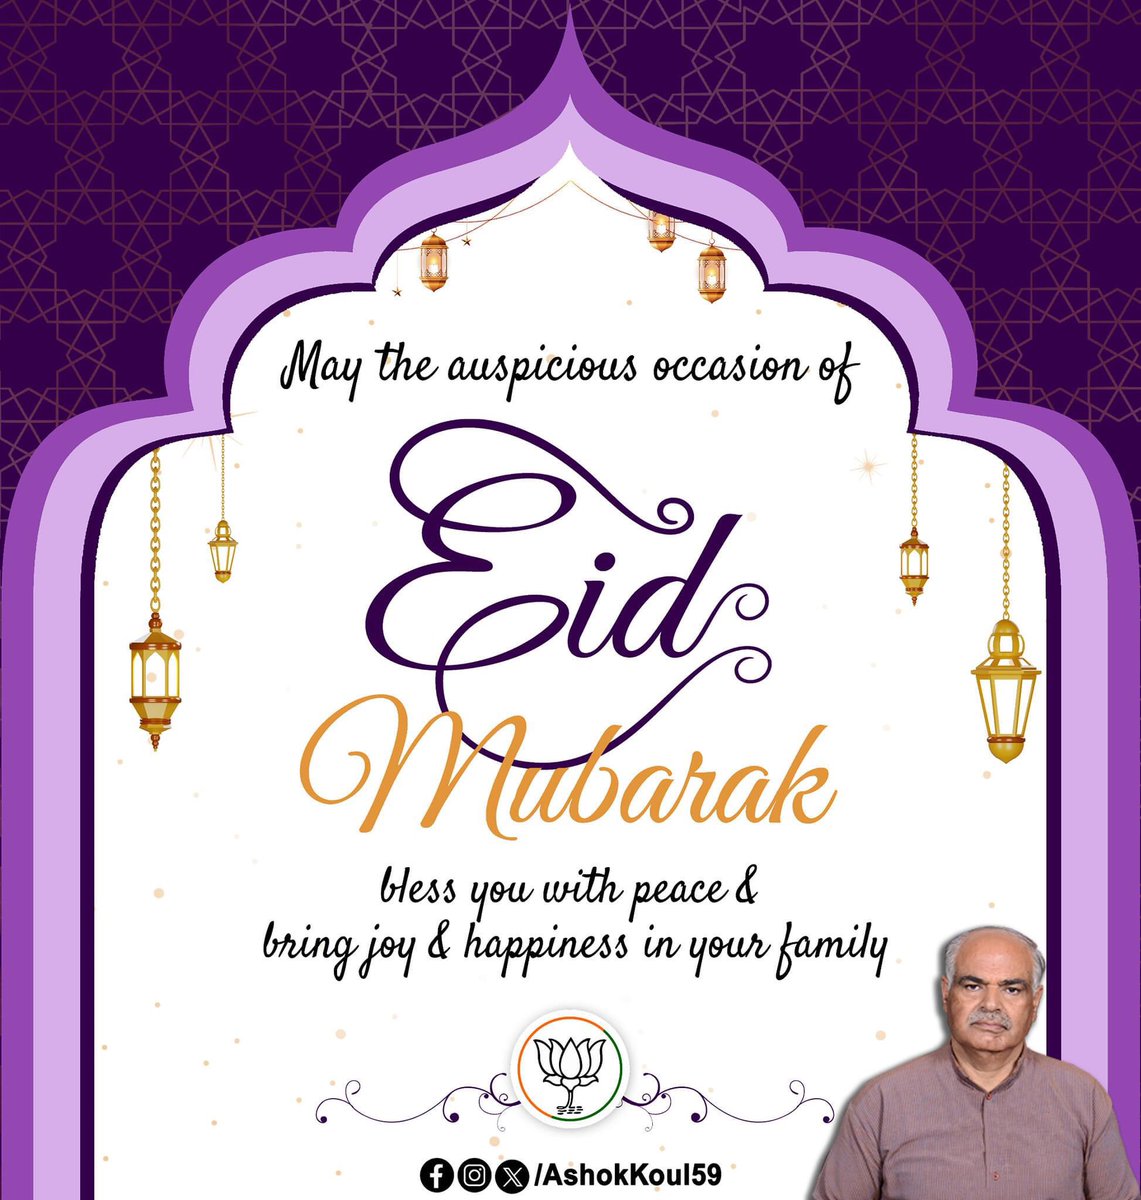 May the auspicious occasion of Eid Mubarak bless you with peace & bring joy & happiness in your family.